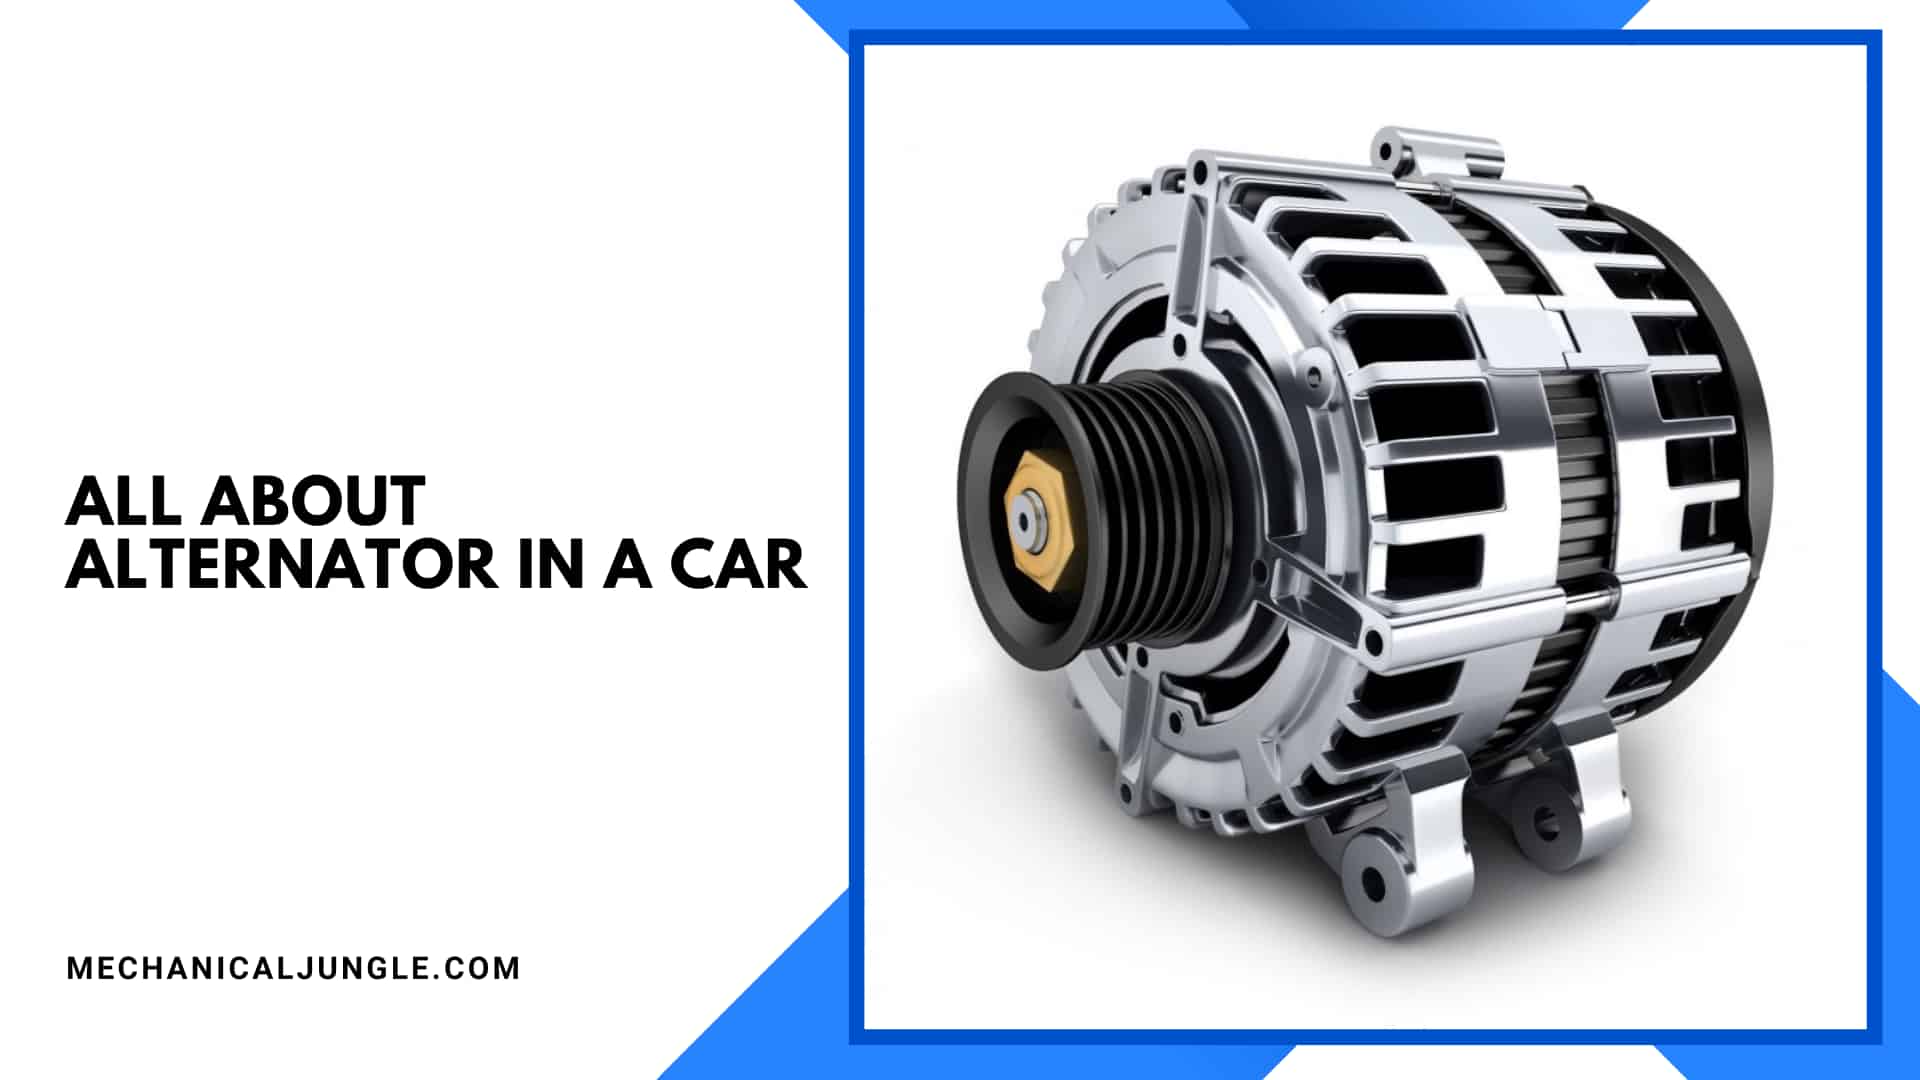 All About Alternator in a Car